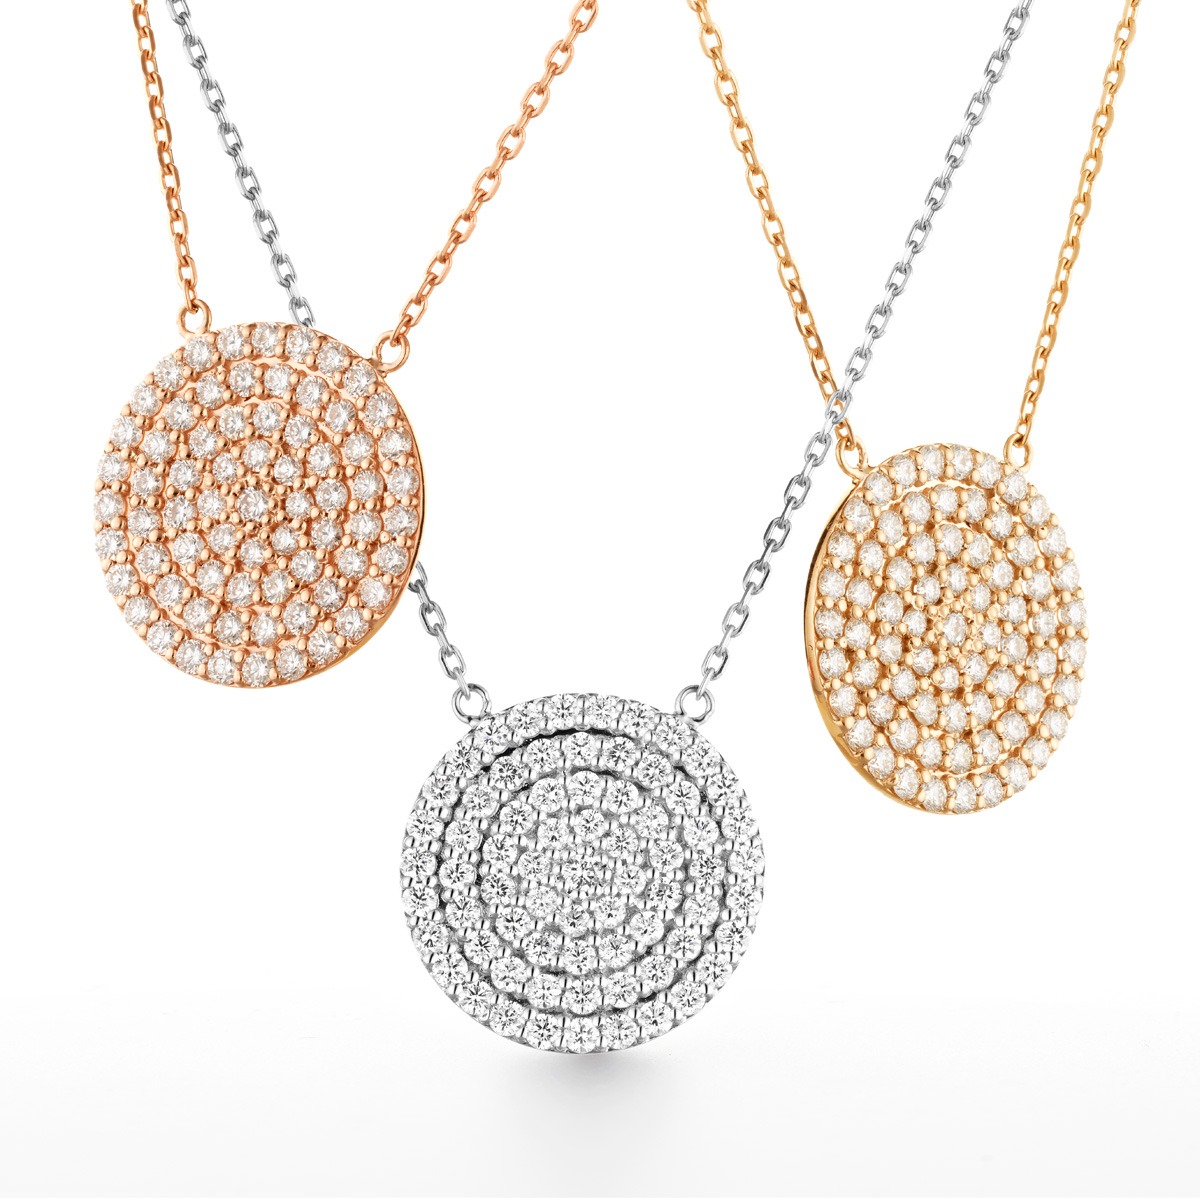 Disc Necklaces Group Image